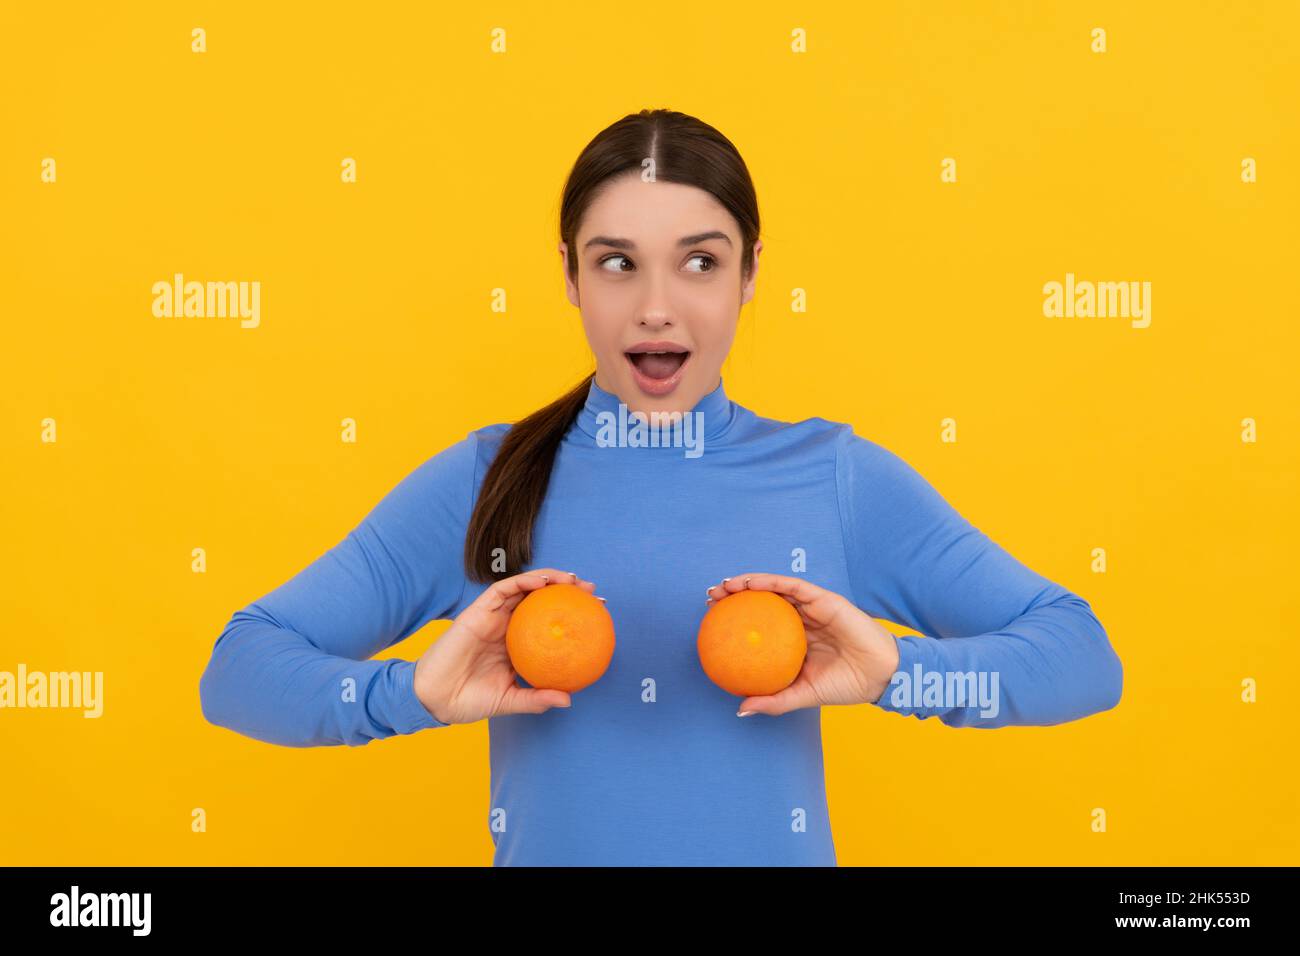 surprised young woman holding orange citrus fruit on yellow background, natural food Stock Photo